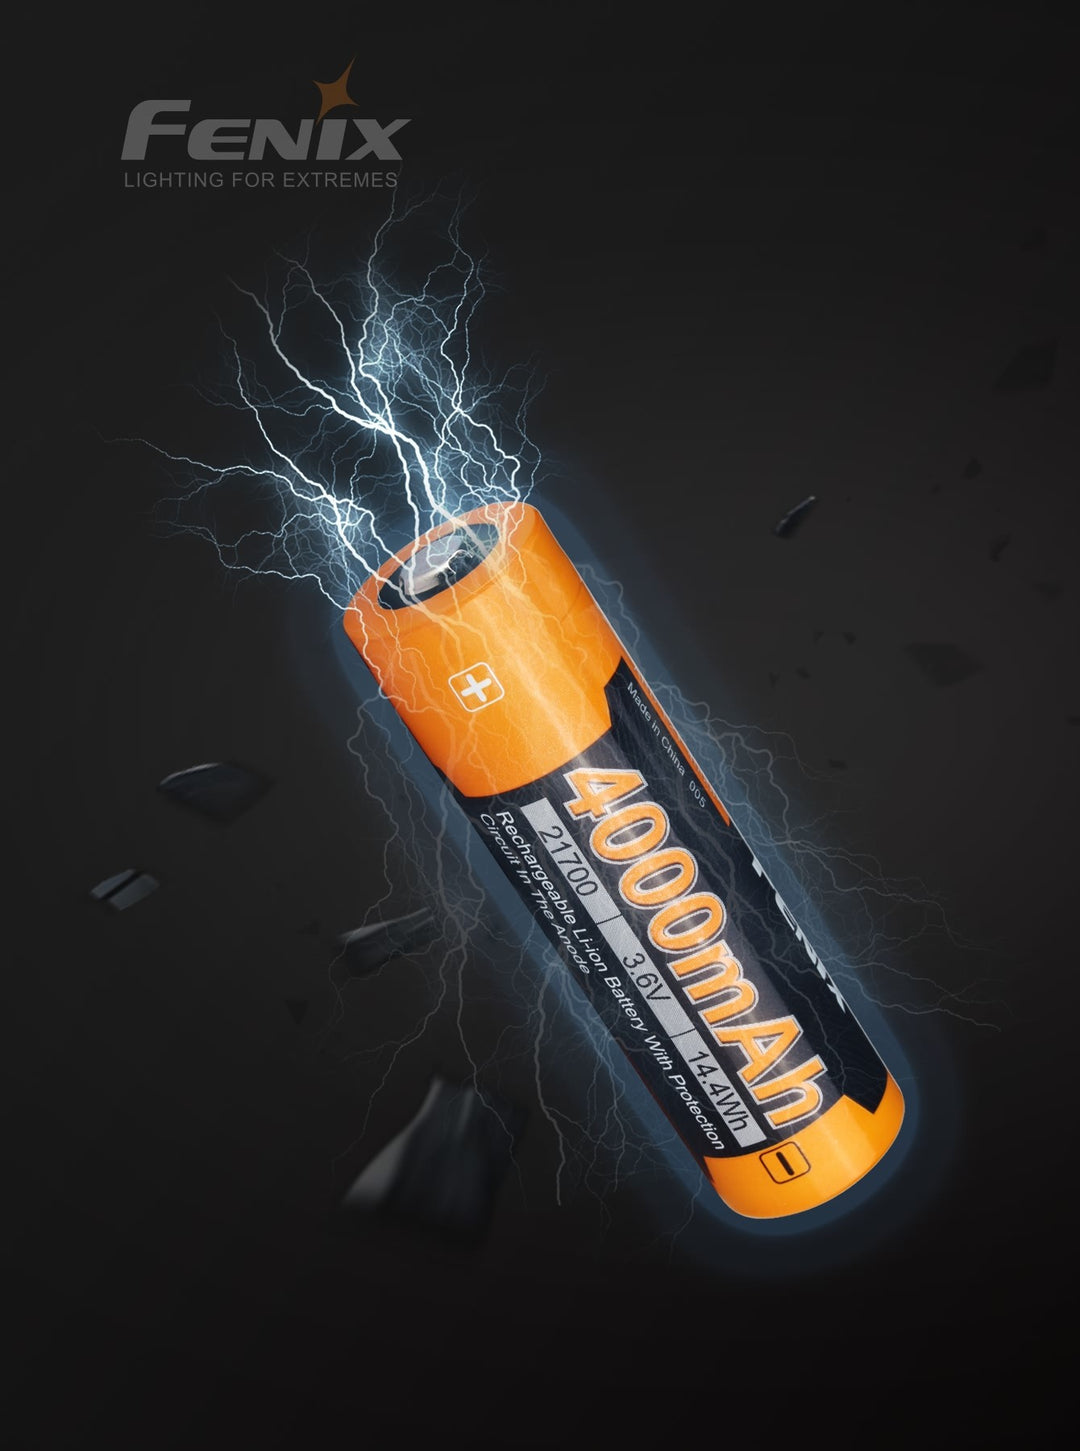 Choosing the right brand of lithium-ion battery - Fenix Safety